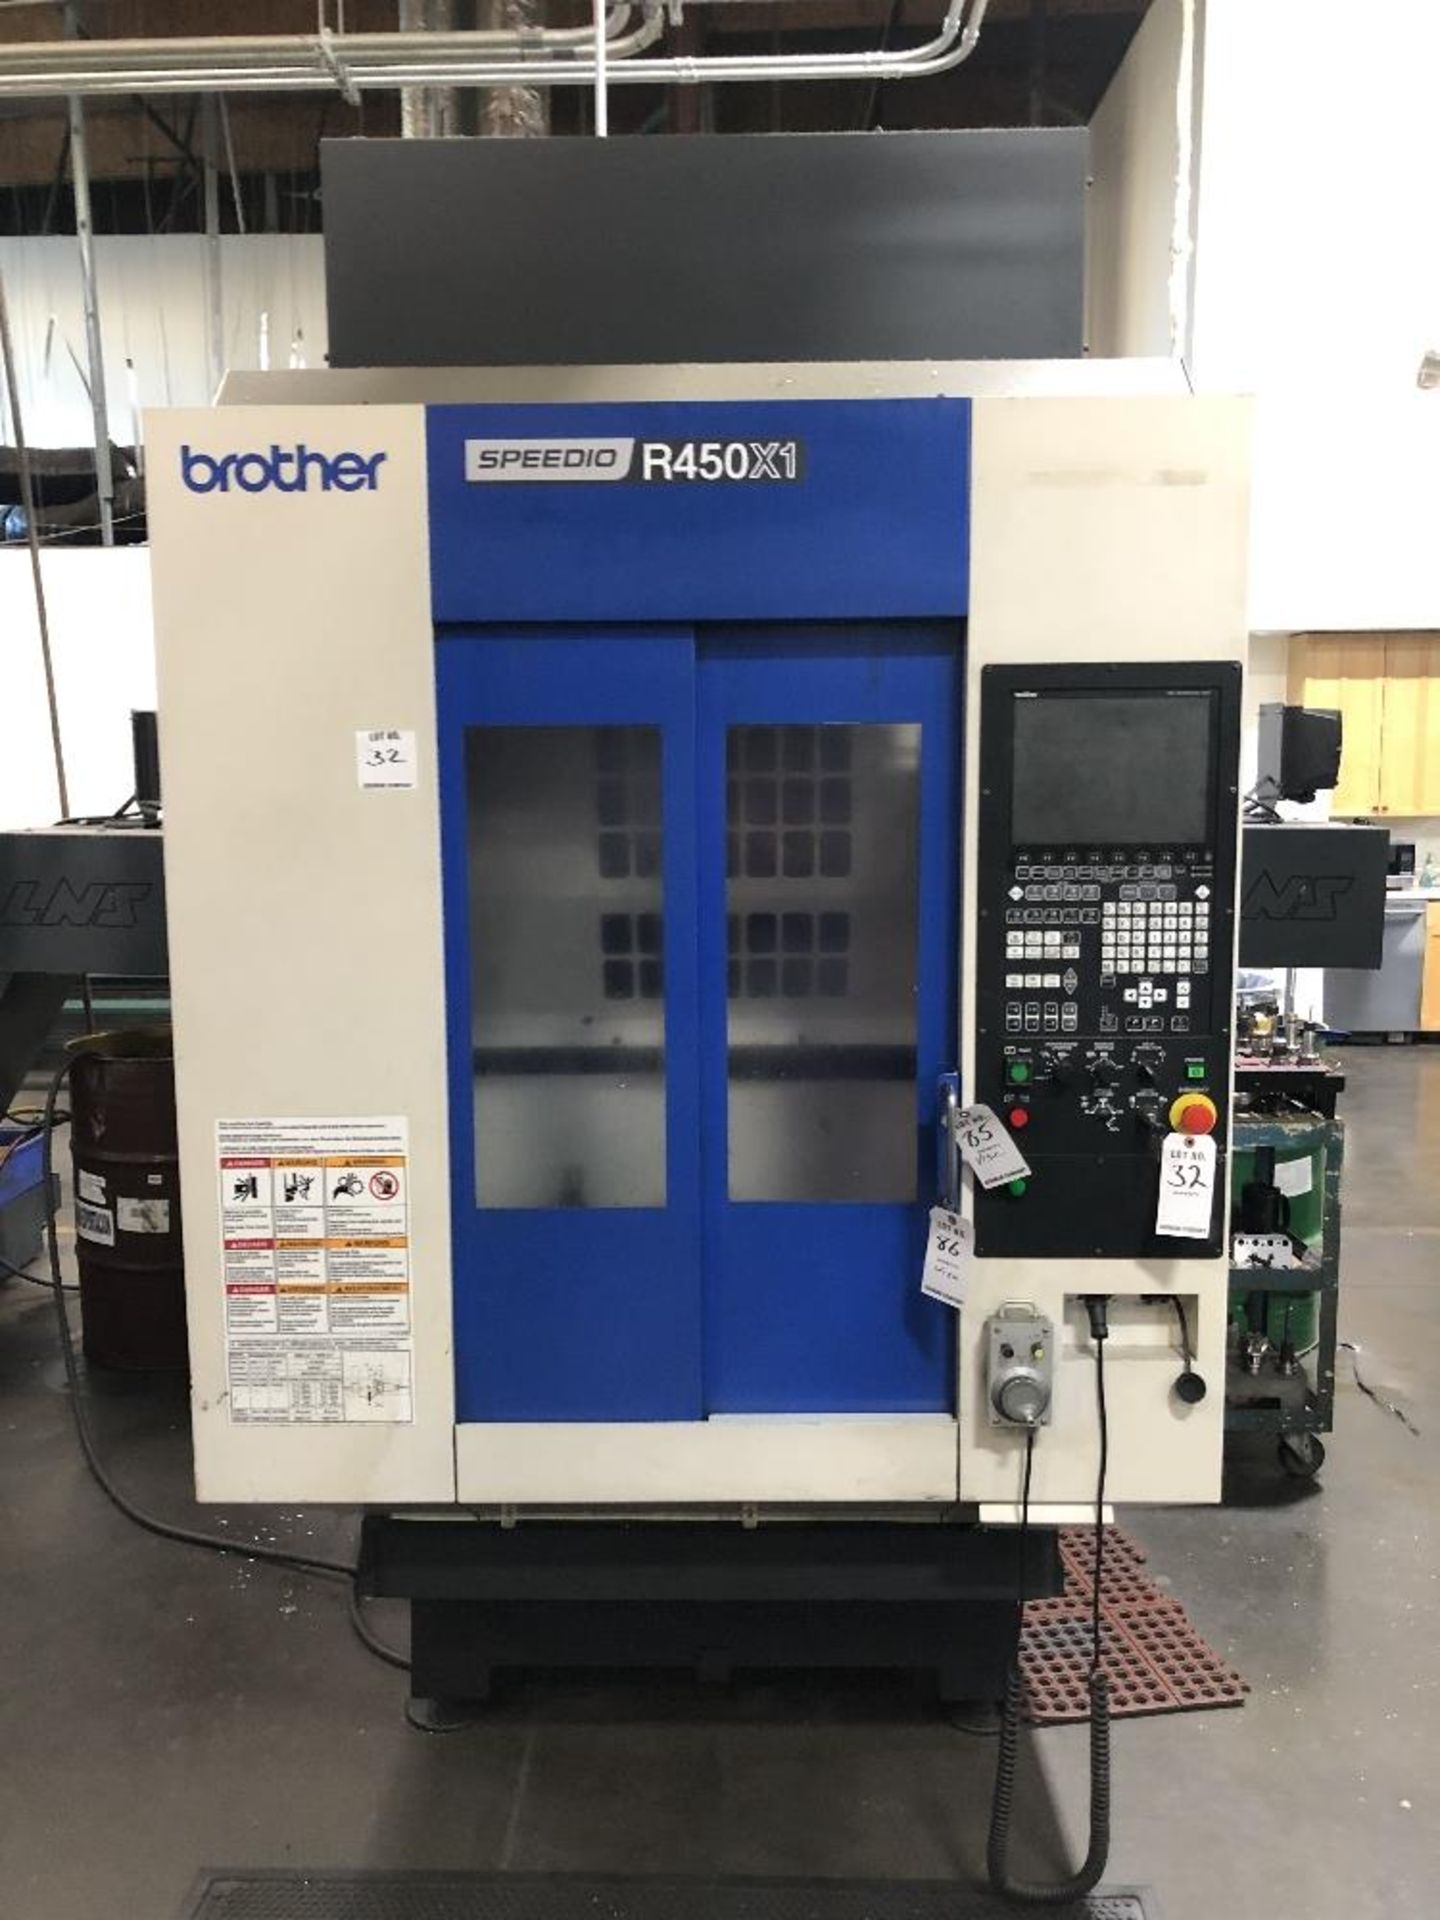 2015 Brother Speedio R450X1- 16,000 rpm spindle speed, bt-30 tooling, 4th axis ready, 10 hp, brother